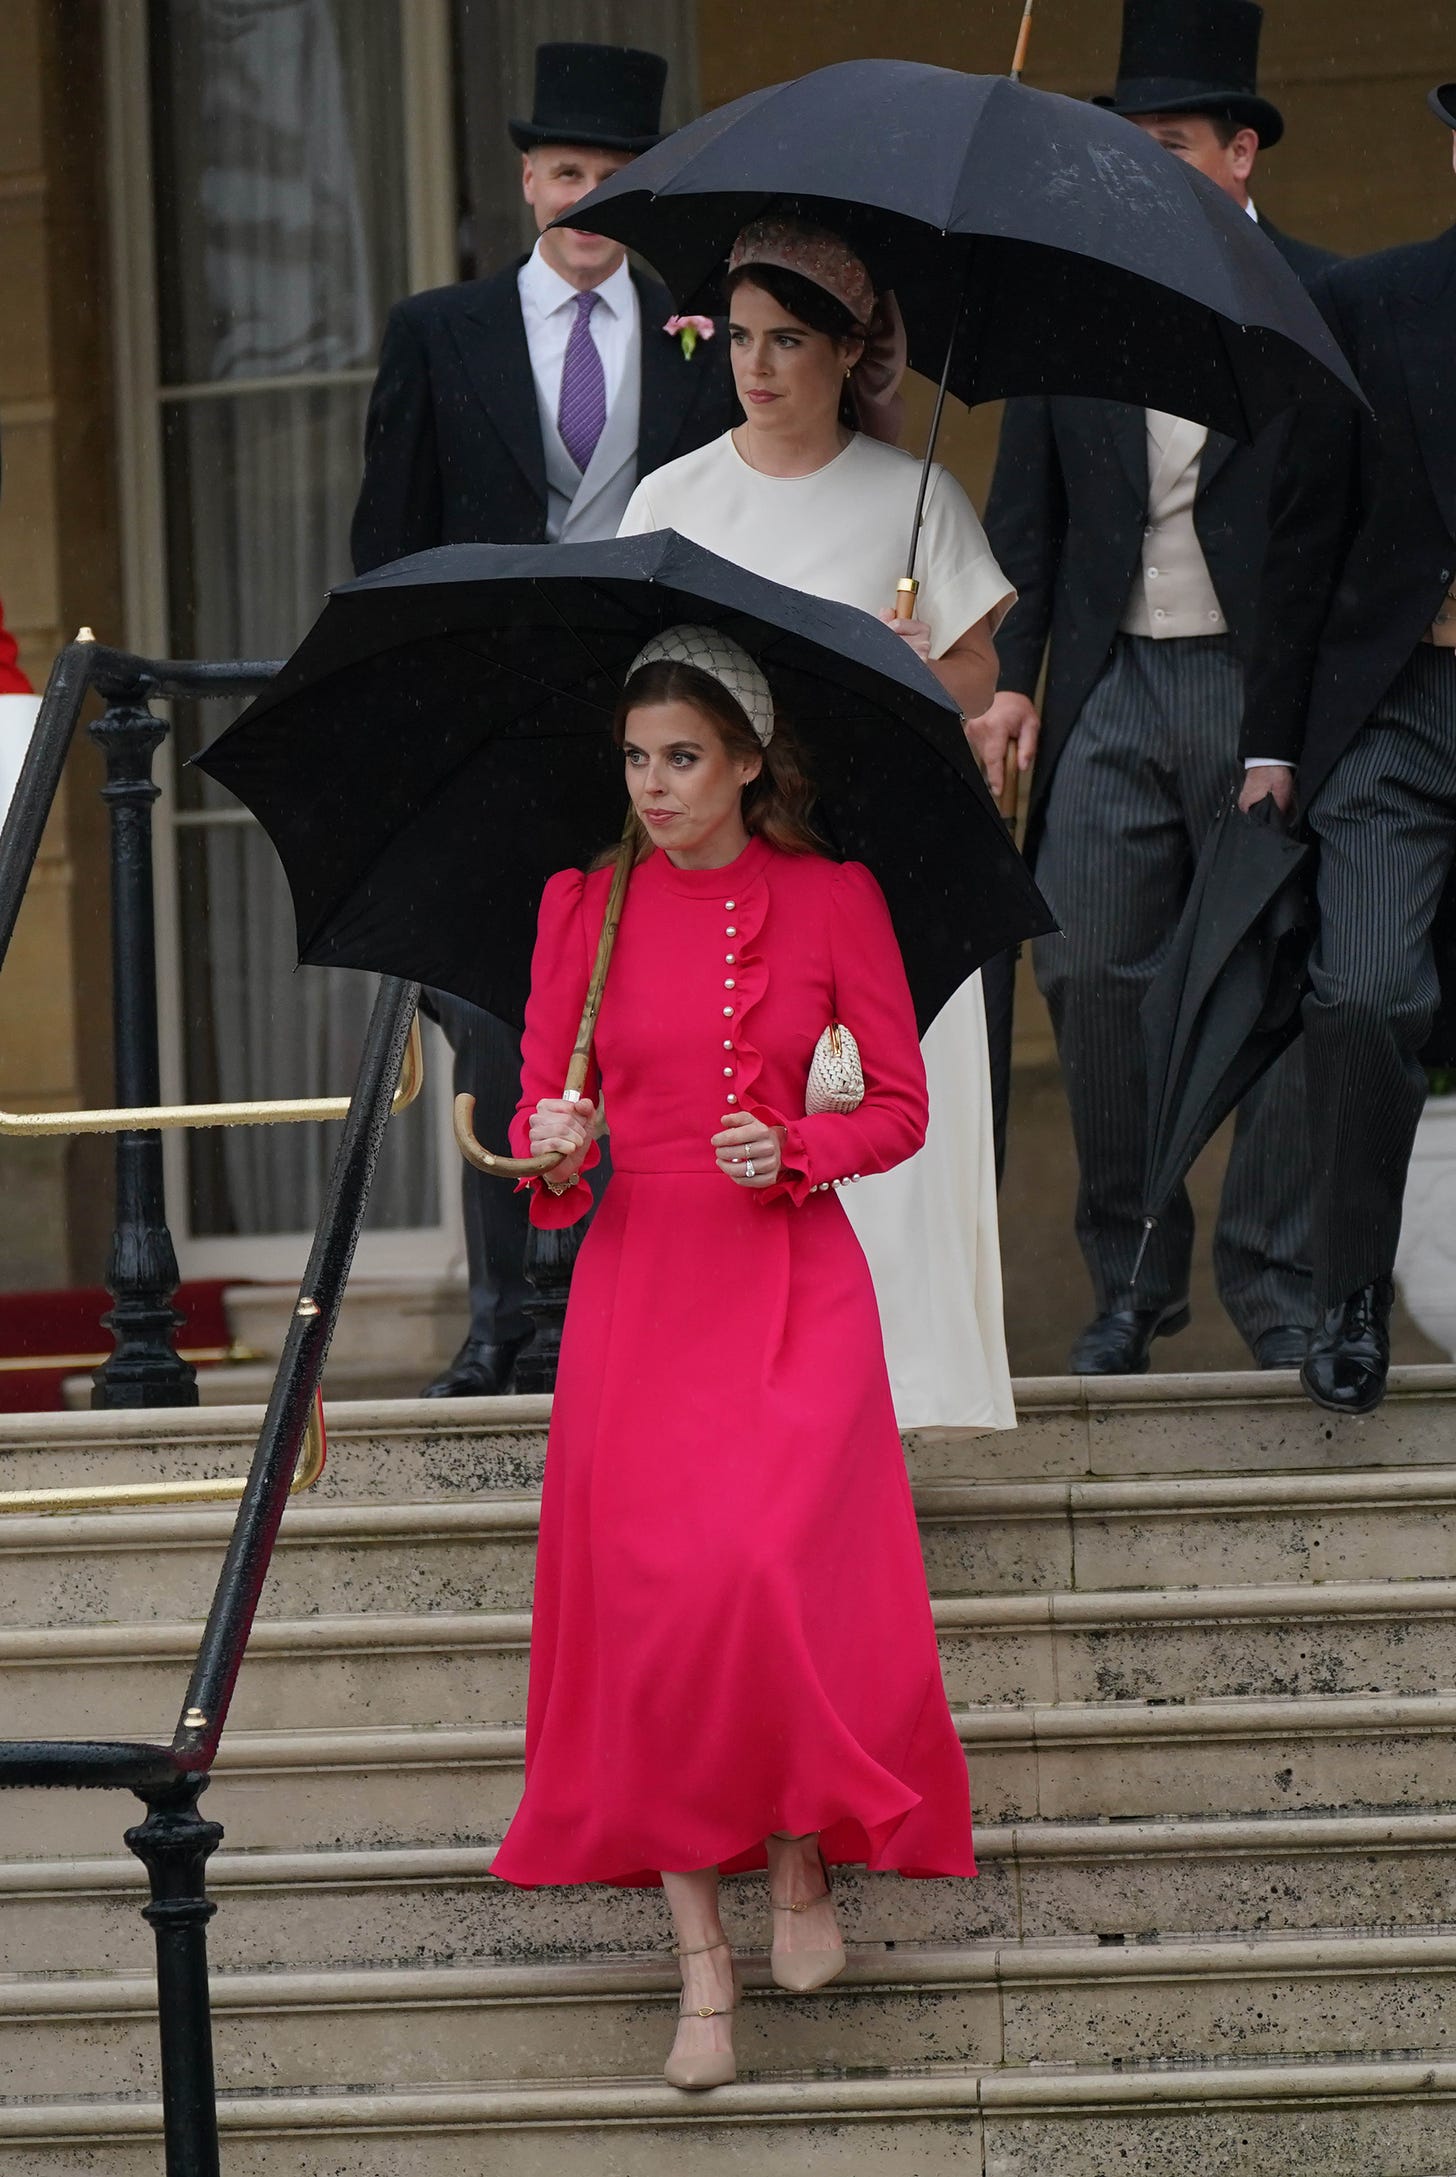 Beatrice and Eugenie holding umbrellas at garden party